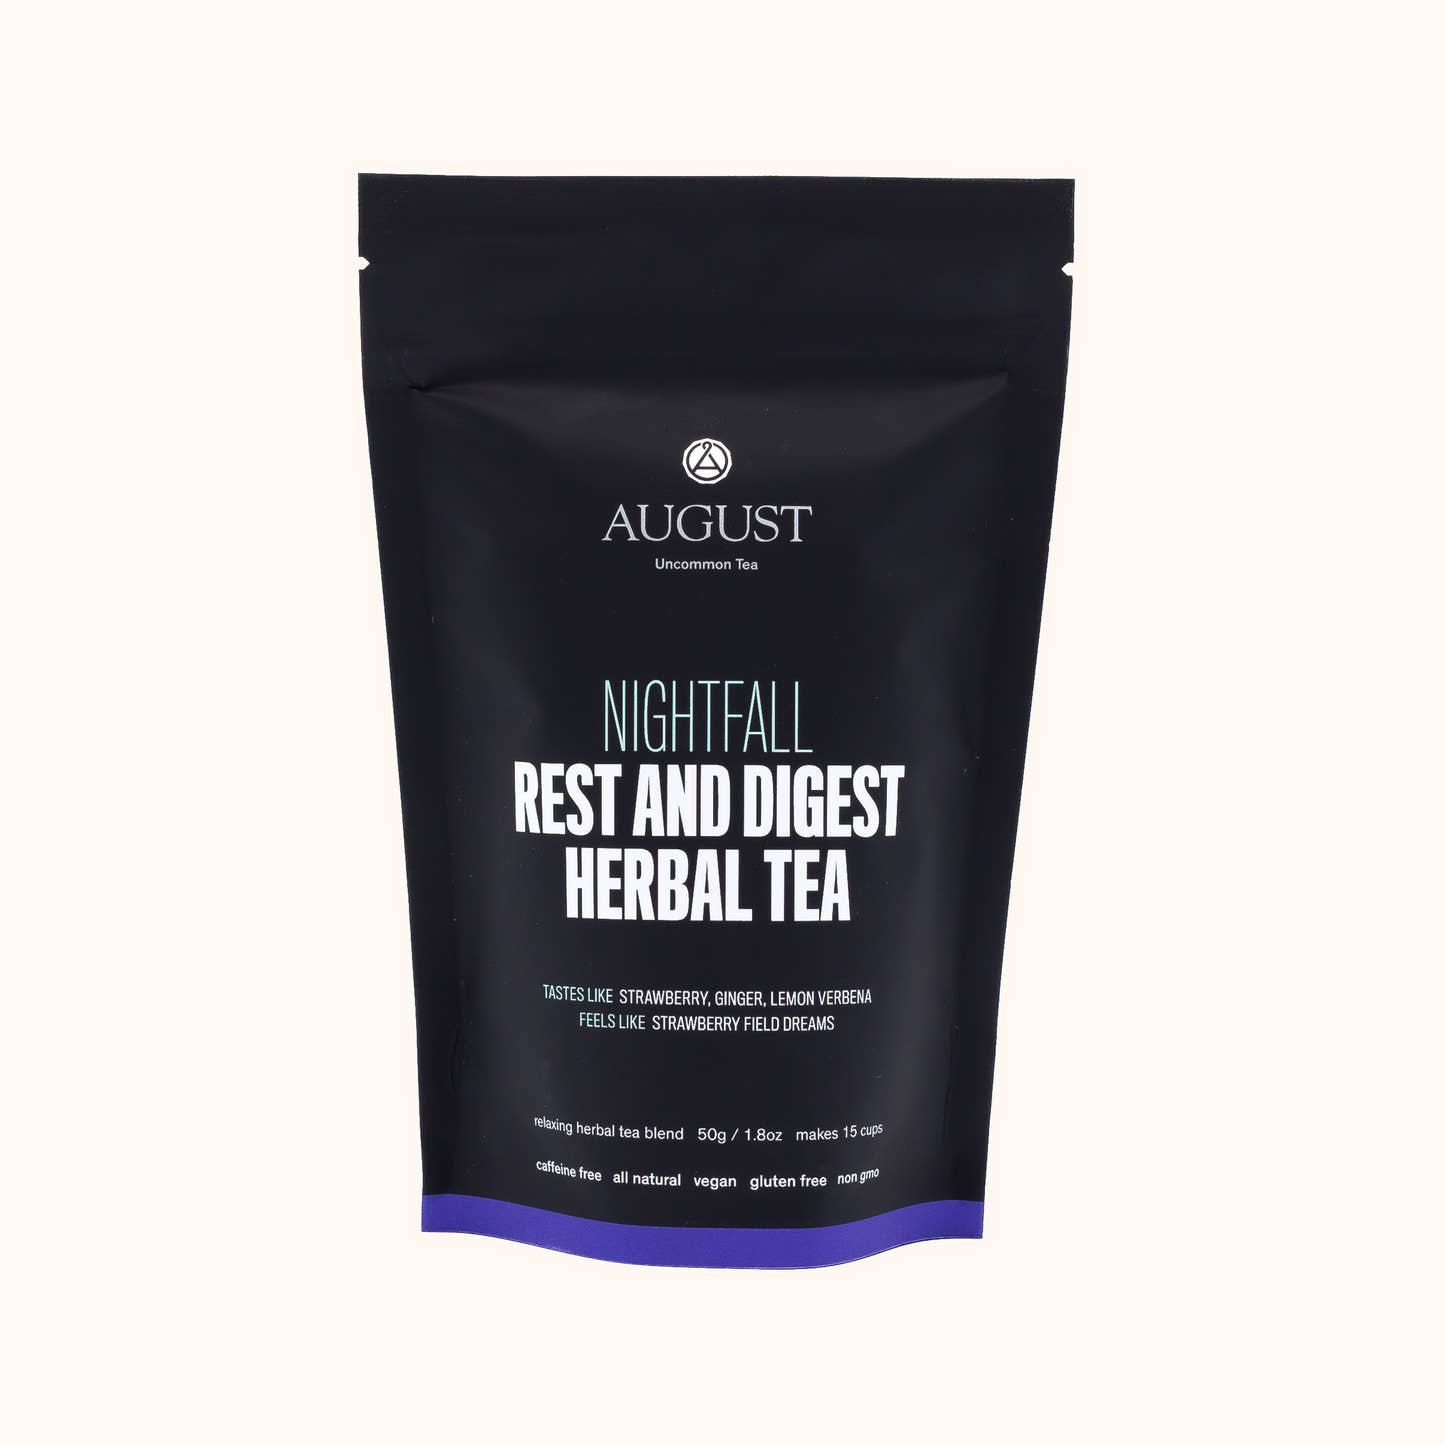 Nightfall by August Uncommon loose leaf tea pouch described as "Rest and Digest Herbal Tea"